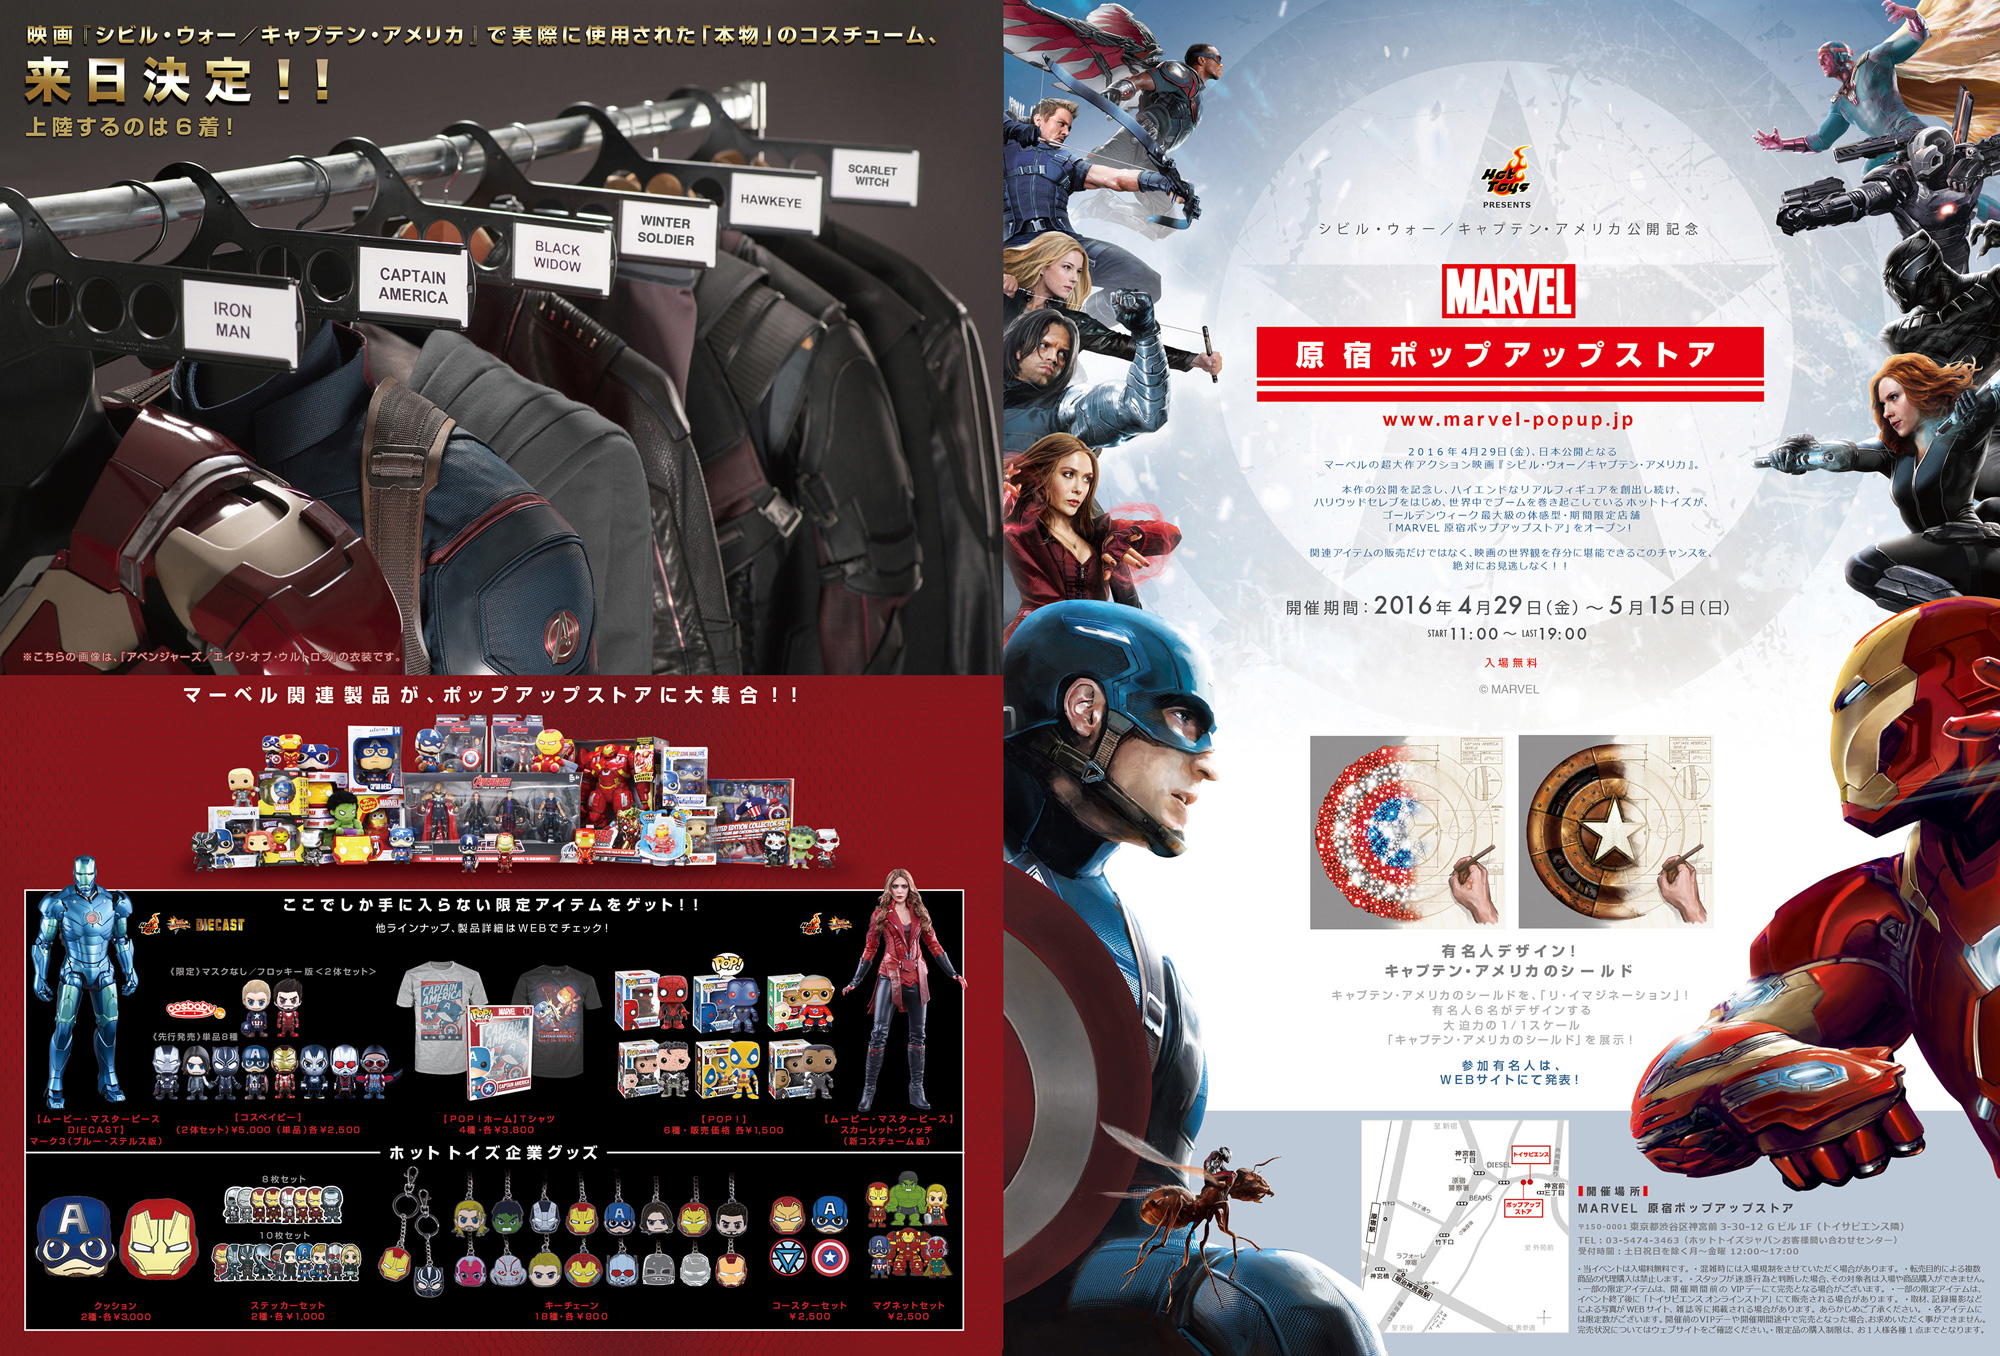 385-1_marvel-popup-store-ad-large.jpg